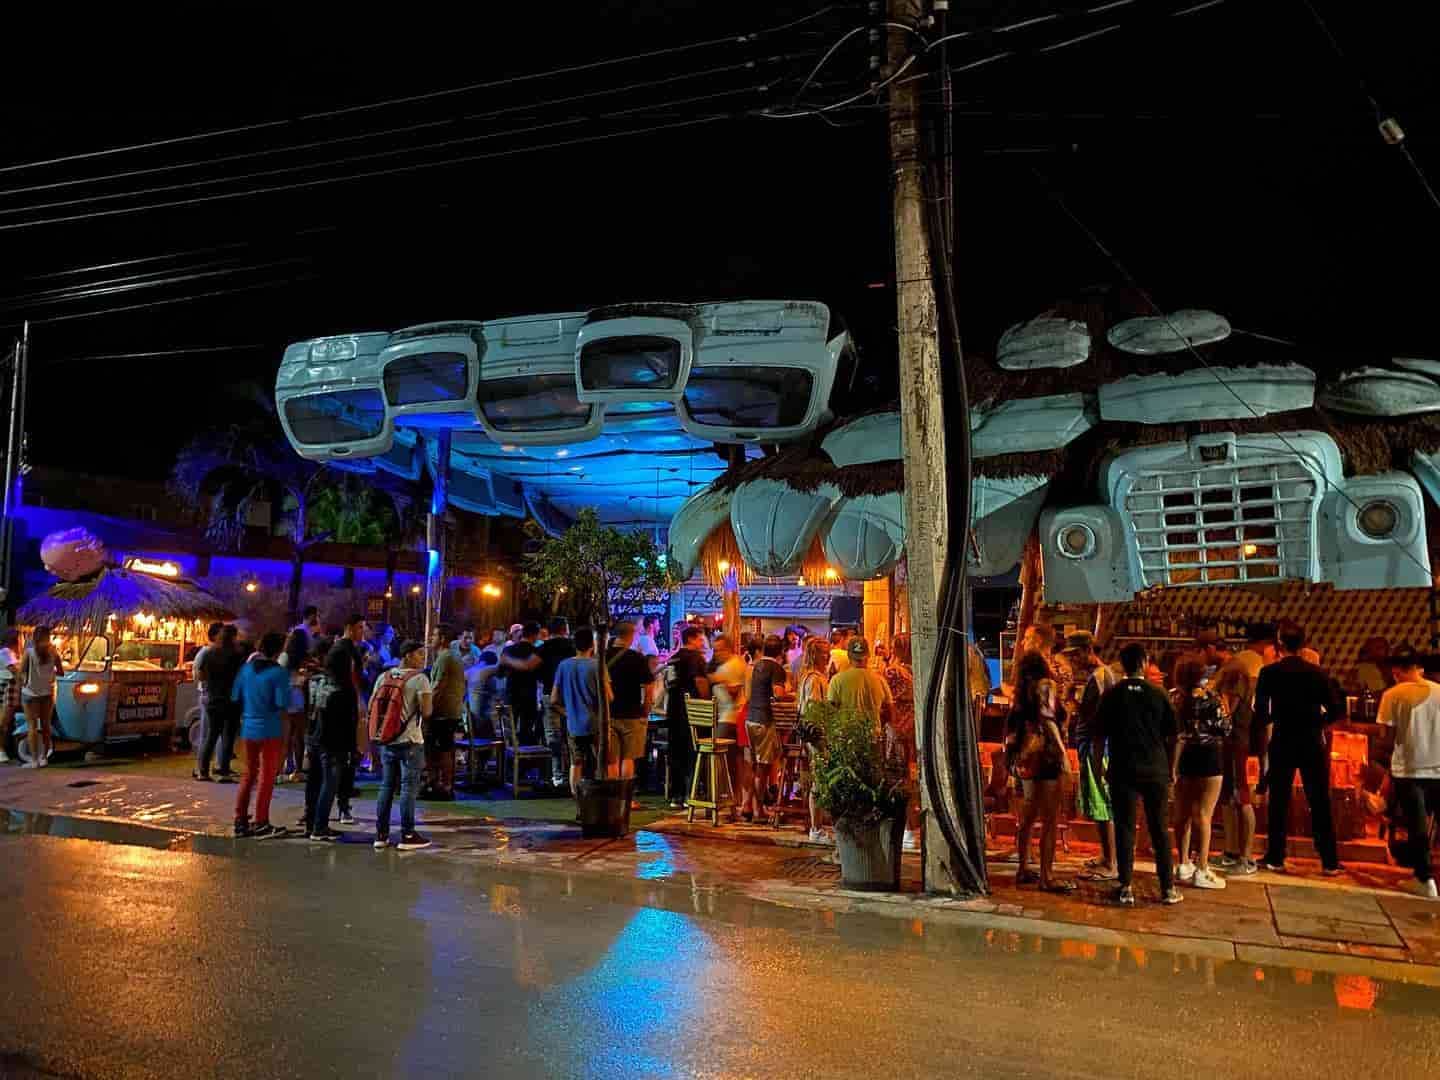 Things to do at night in Tulum